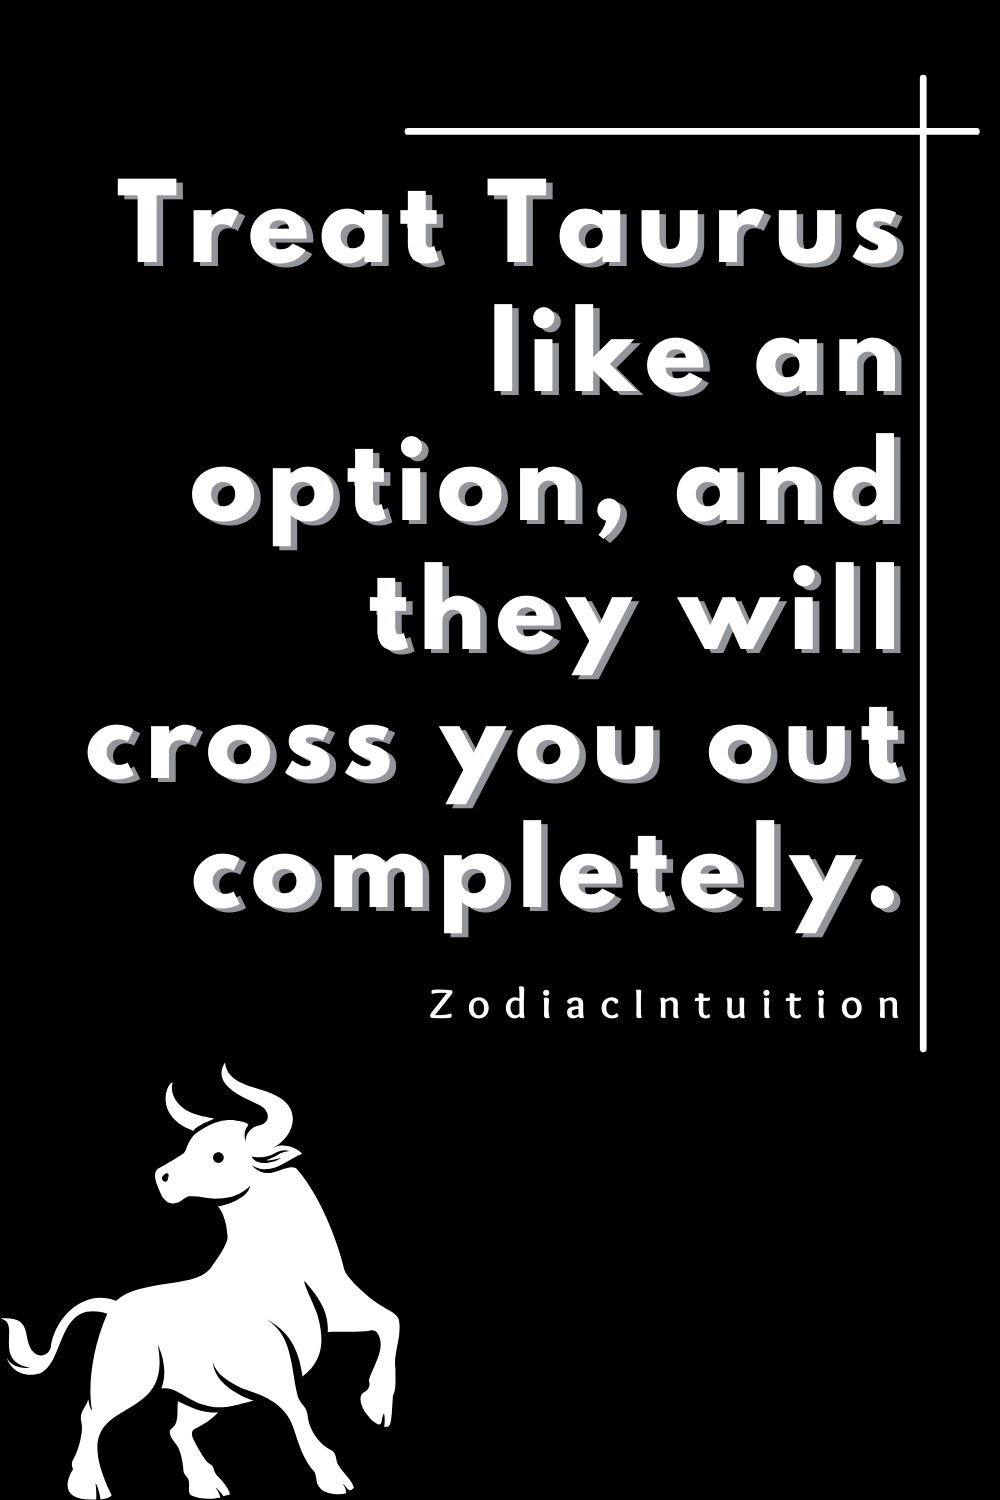 Treat Taurus like an option, and they will cross you out completely.